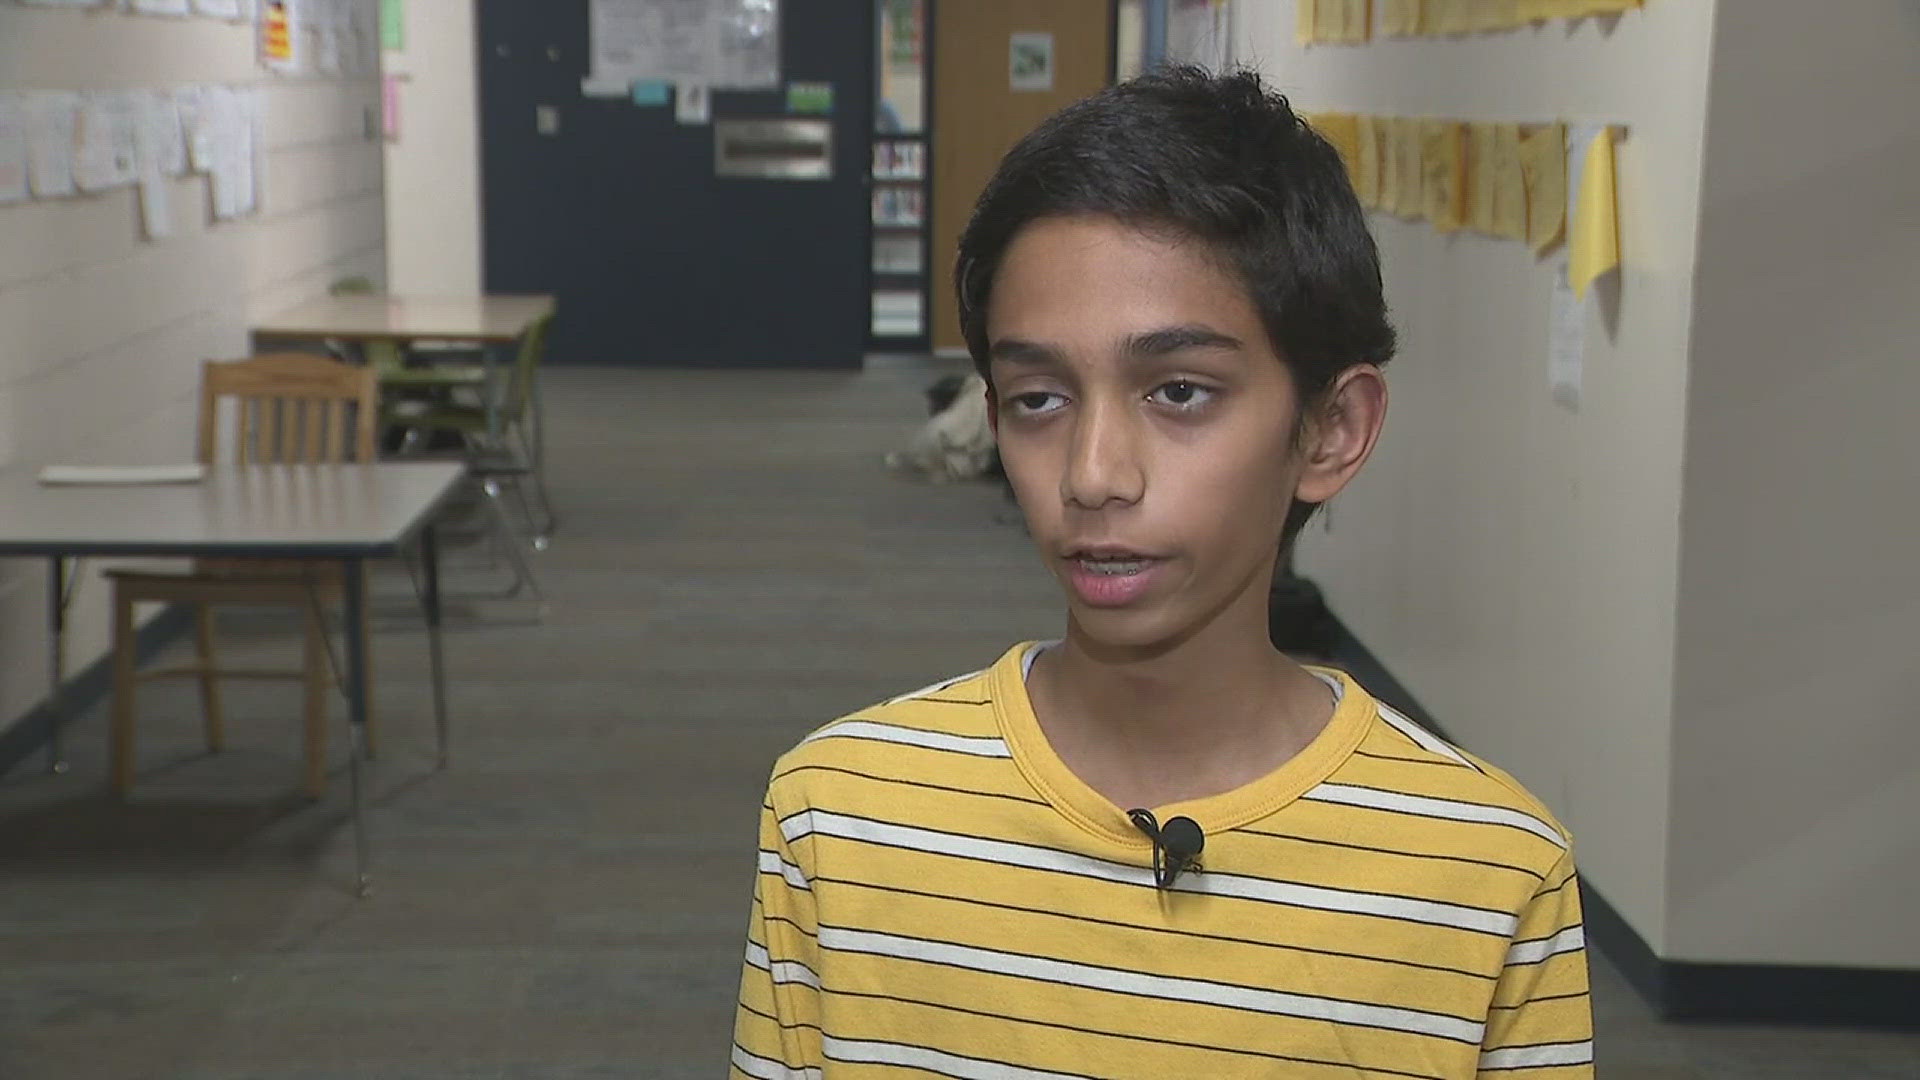 12-year-old Parthasaradhi Katreddy is a seventh grader at Pleasant Valley and is headed to the Scripps National Spelling Bee later this month.